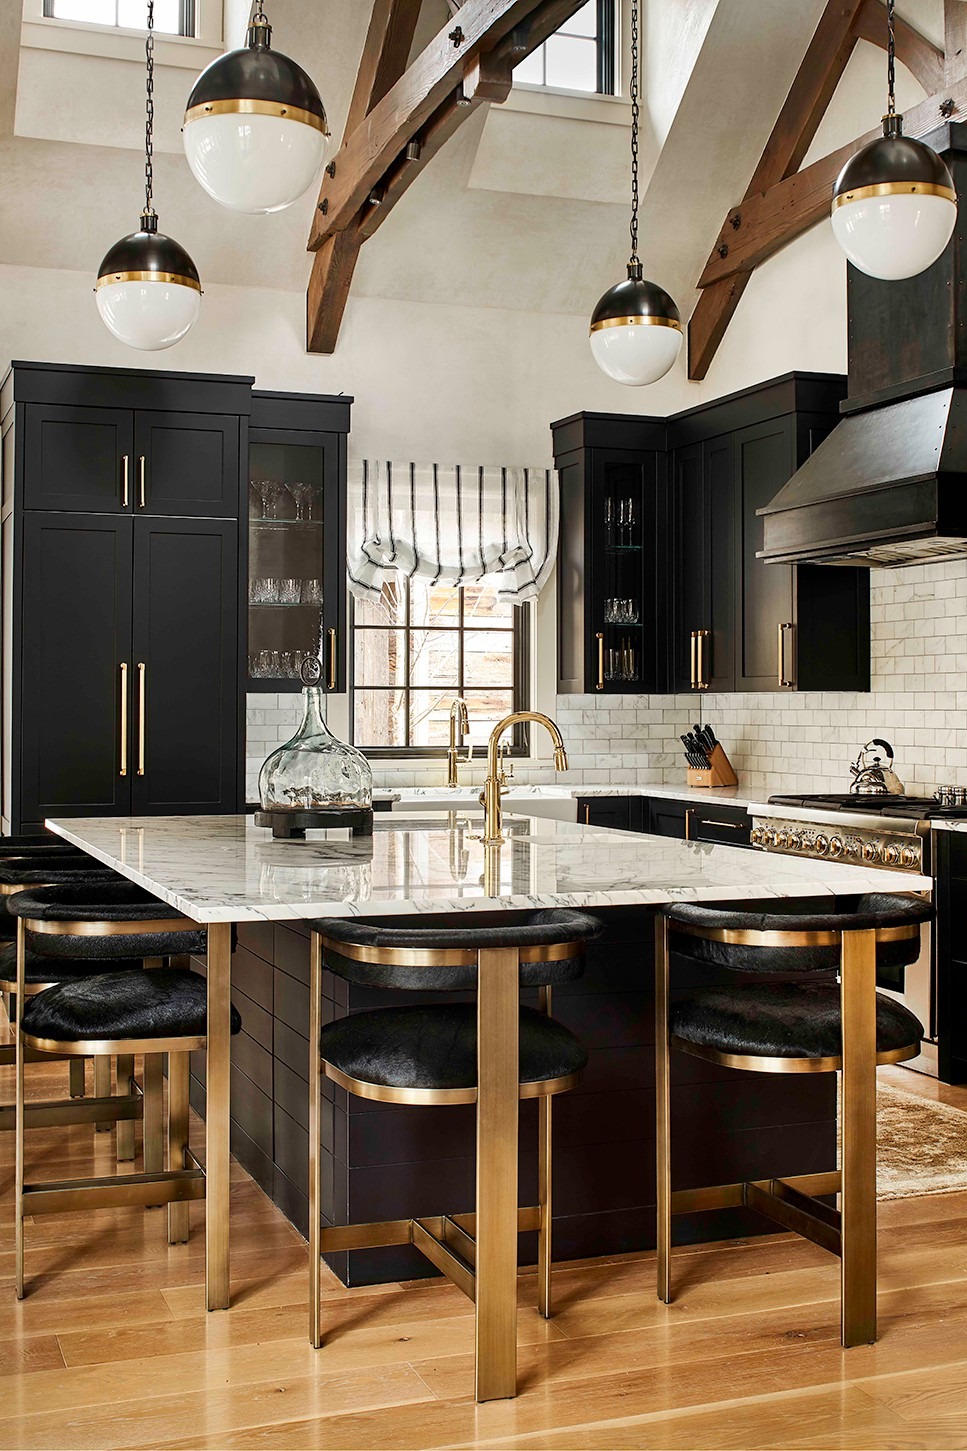 Black Kitchen Cabinets Exposed Brick Wall Marble Countertop Island Style Bold Walls